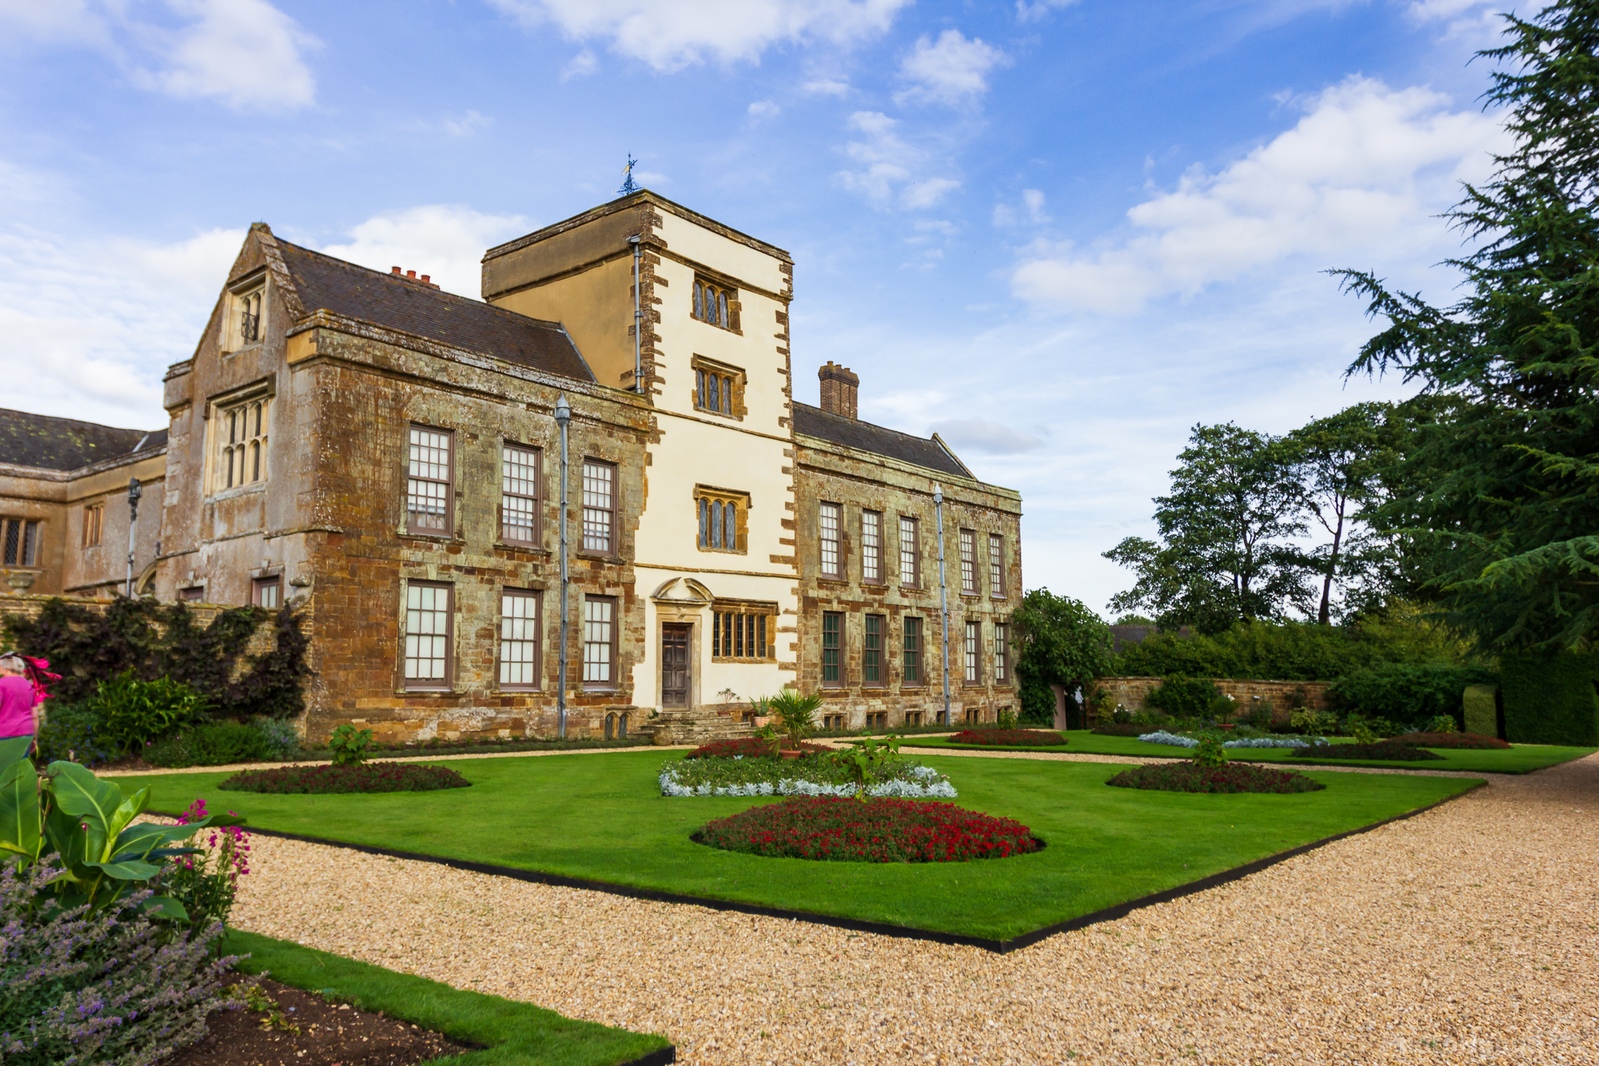 Image of Canons Ashby House by Carol Henson